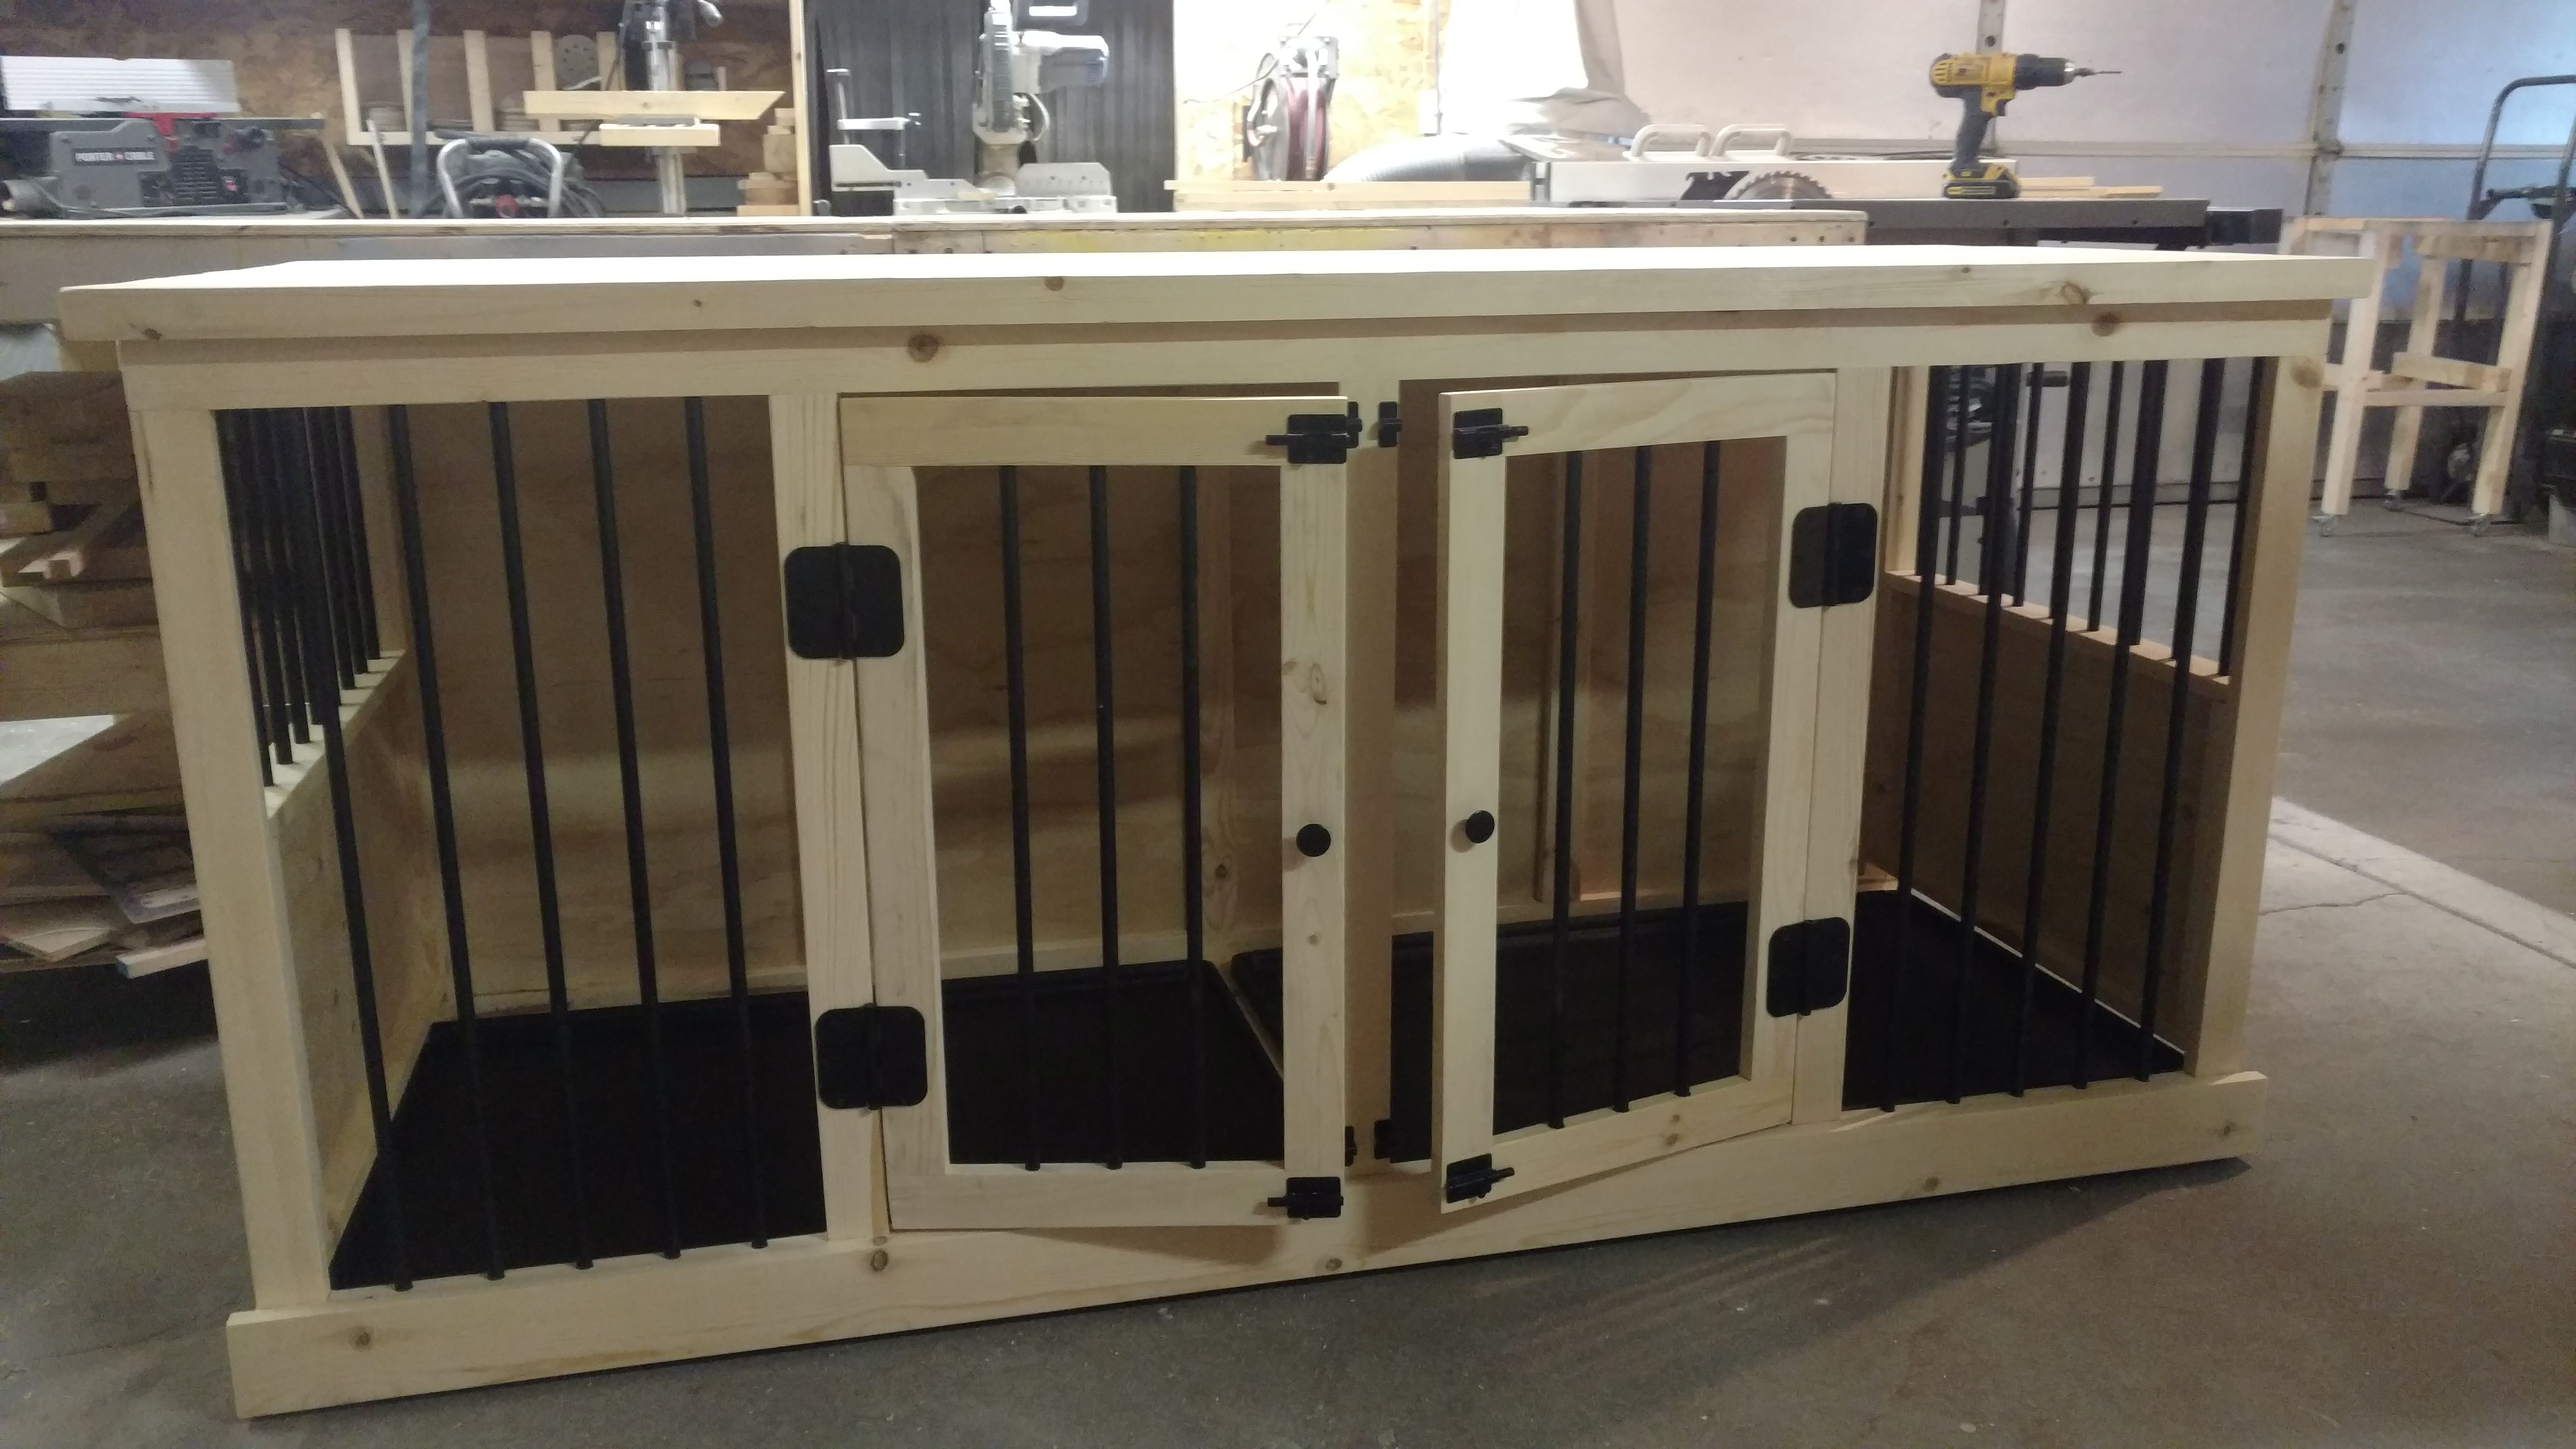 personalized dog crates